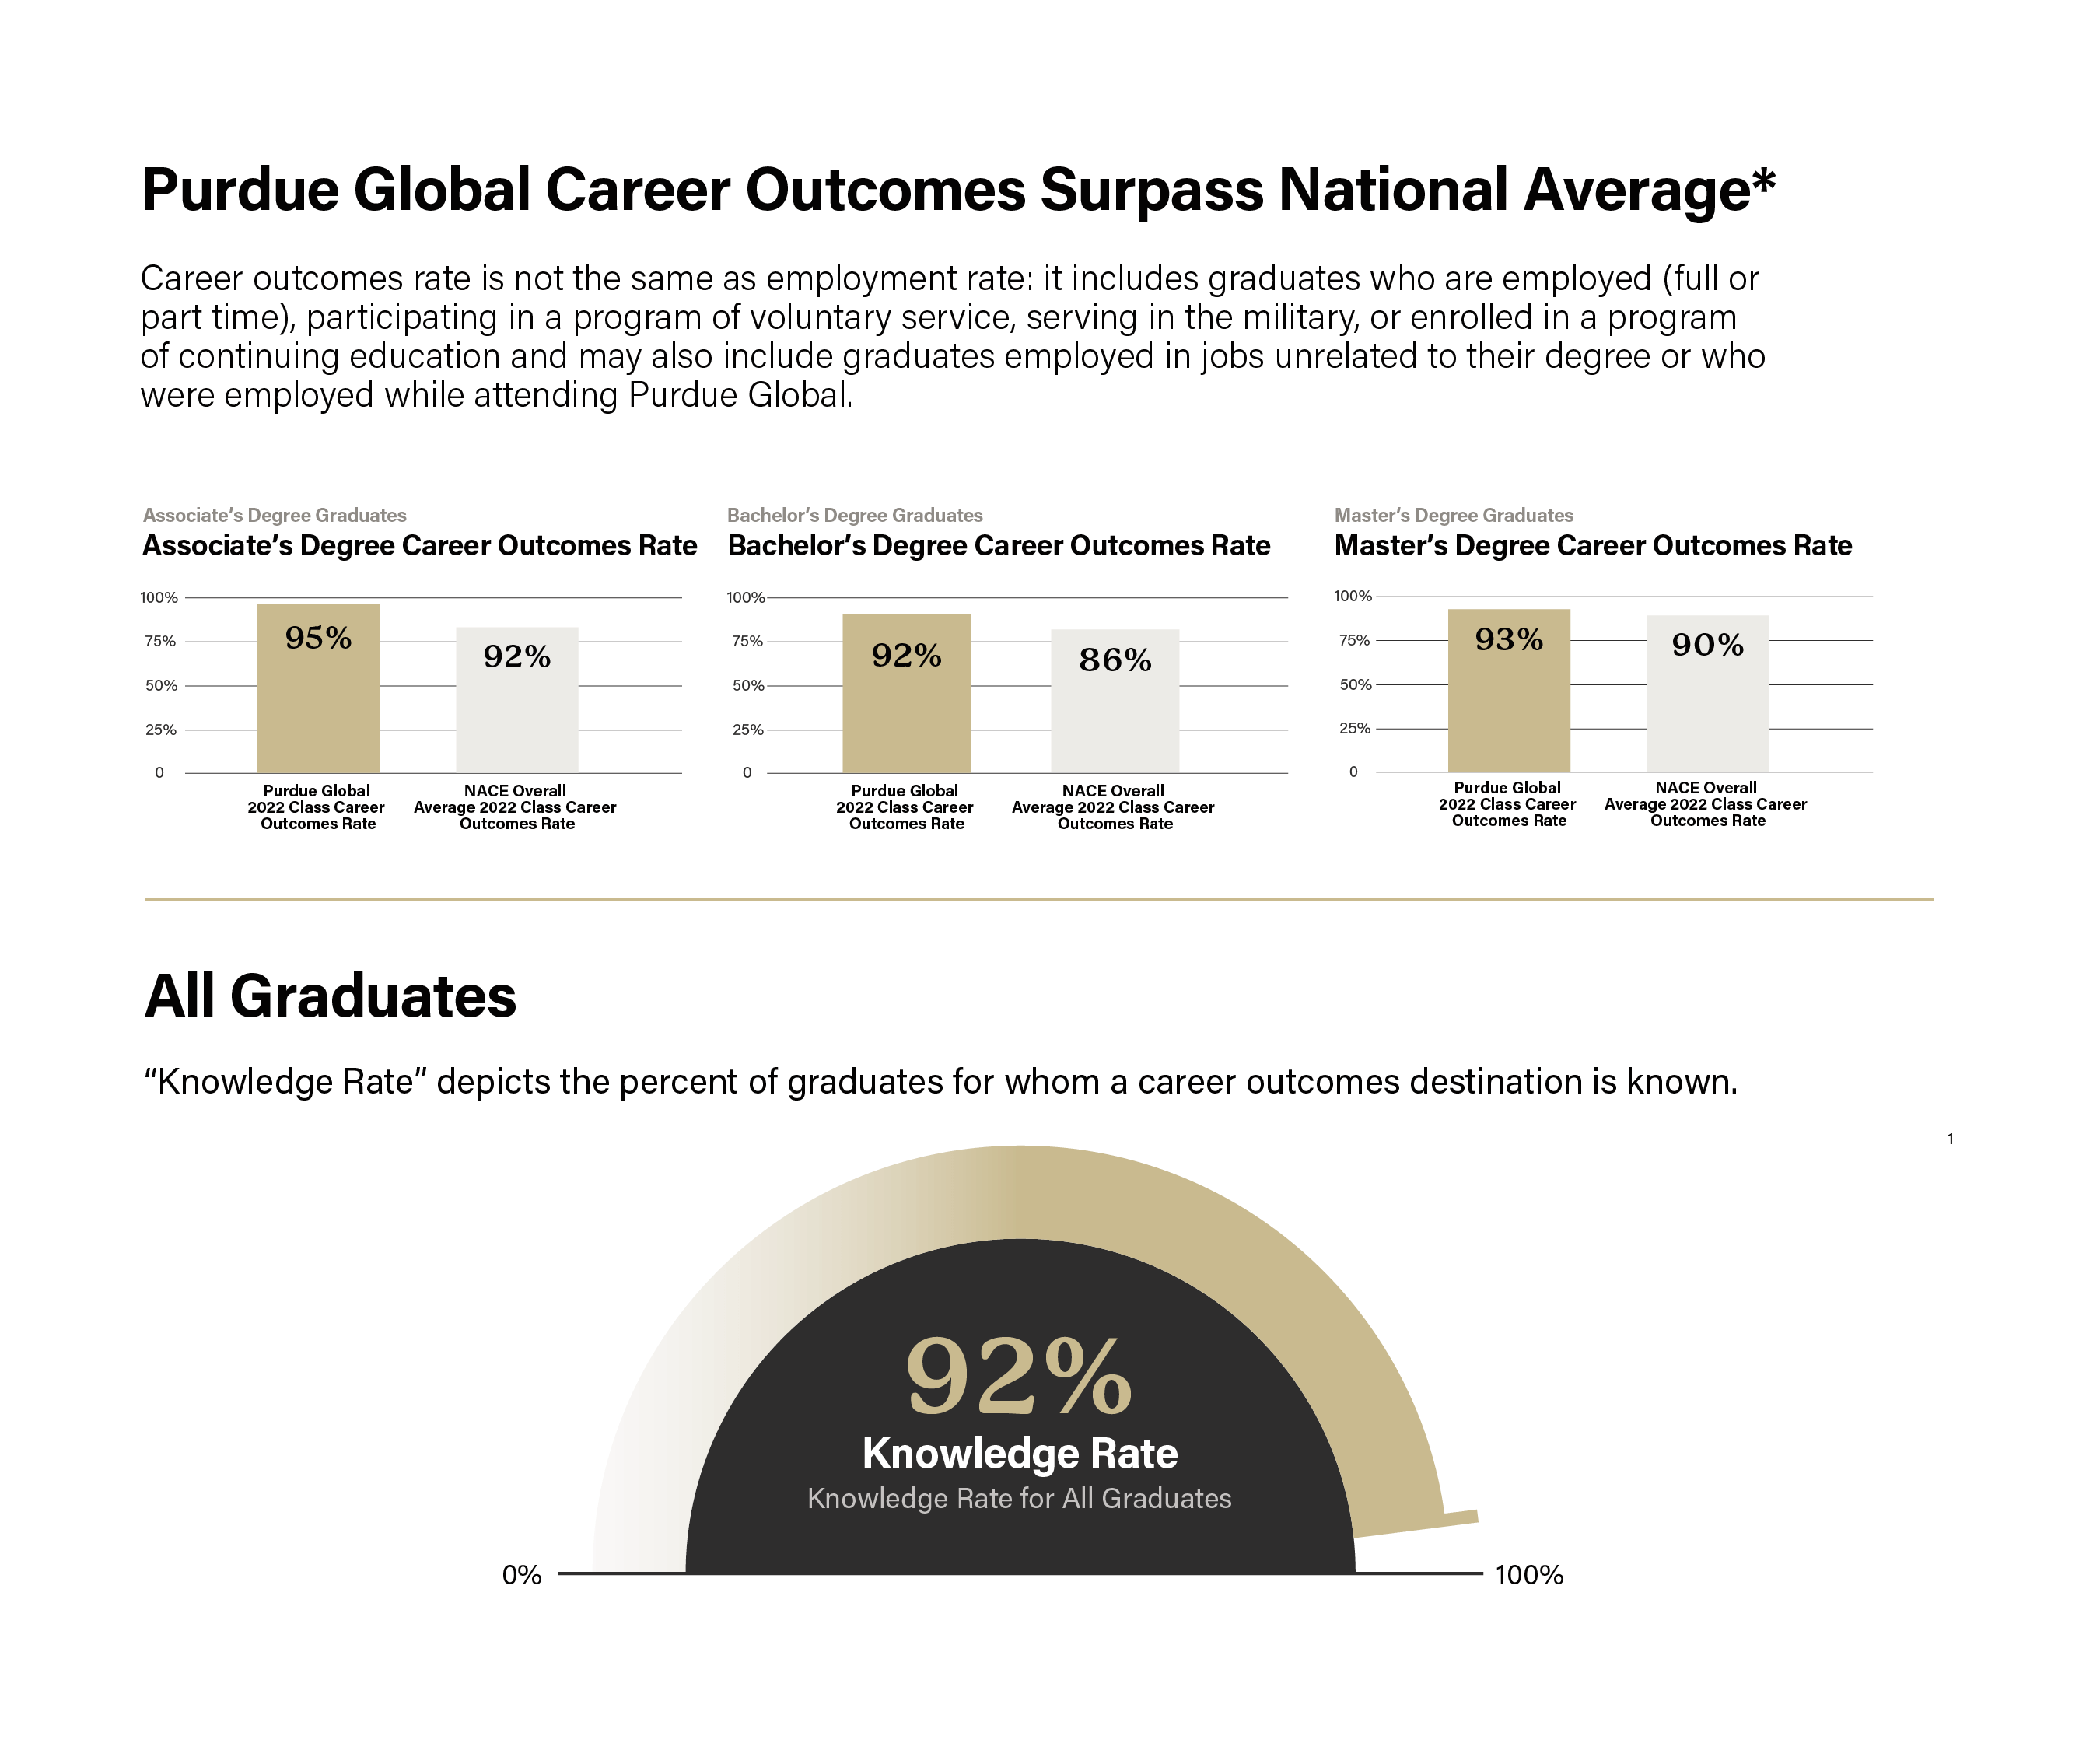 Bar charts showing Purdue Global career outcome rates surpass the national average. Stacked bar graph representing associate's degree career outcome rates of 93% (Purdue Global 2021 class) and 90% (NACE average, 2021 class), bachelor's degree career outcome rates of 92% (Purdue Global 2021 class) and 84% (NACE overall average, 2021 class), and master's degree career outcome rates of 93% (Purdue Global 2021 class) and 88% (NACE average, 2021 class). Horizontal bar graph representing bachelor's degree candidates pursuing additional education: 82.8% pursue a master's degree, 5.7% pursue a second bachelor's degree, 5.3% pursue a nondegree certificate, 4.8% pursue a PhD / doctoral program, and 1.4% pursue additional coursework. Icon of a brain in a banner listing a 93% knowledge rate for all graduates.